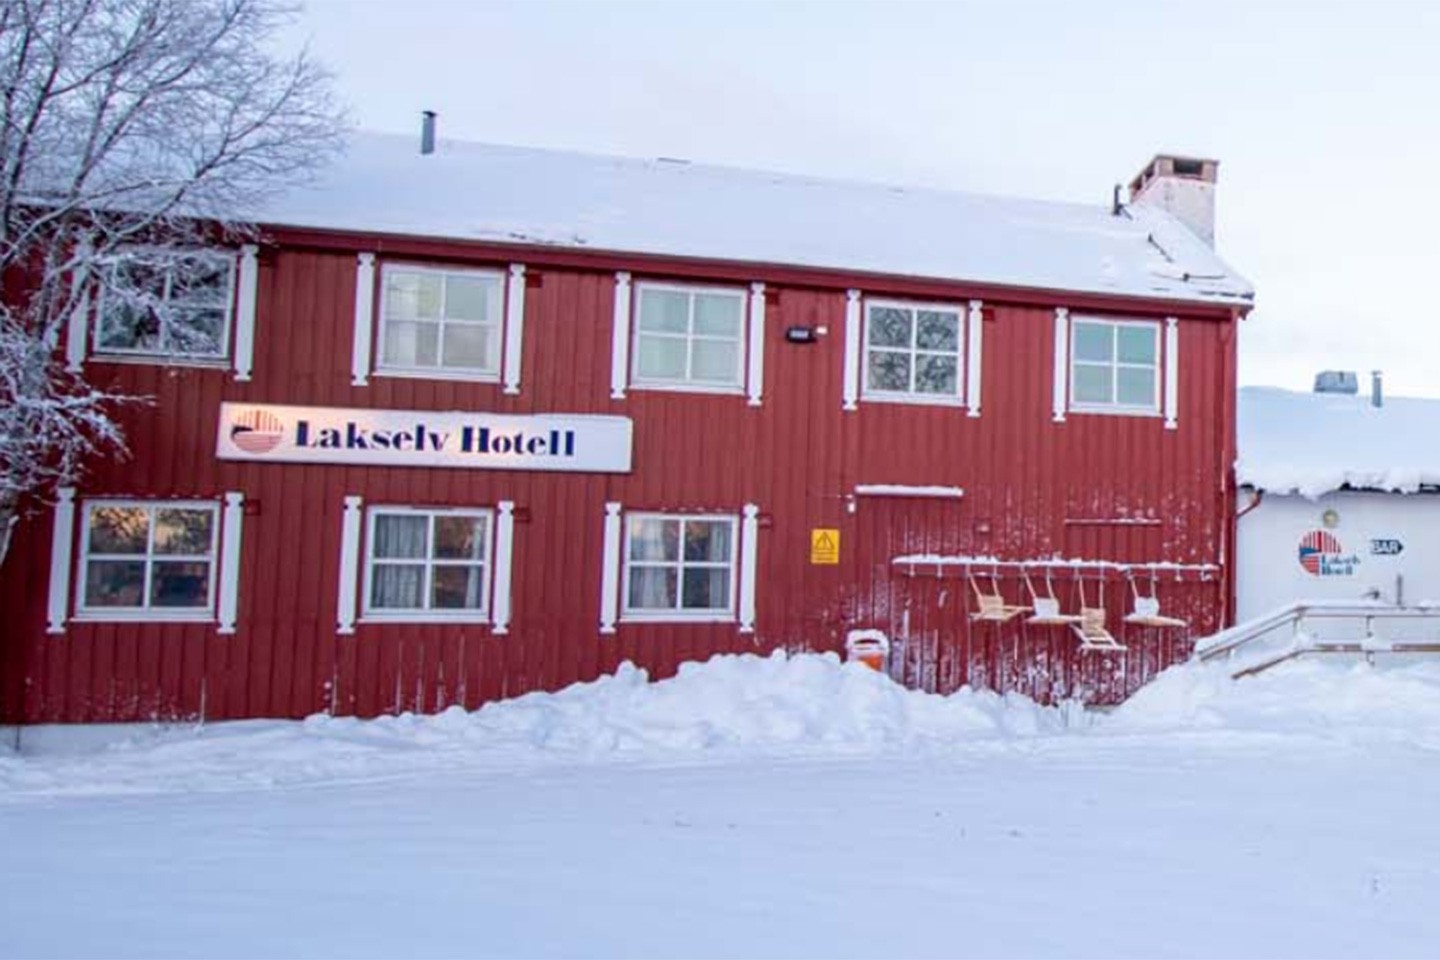 Lakselv, Lakselv Hotel